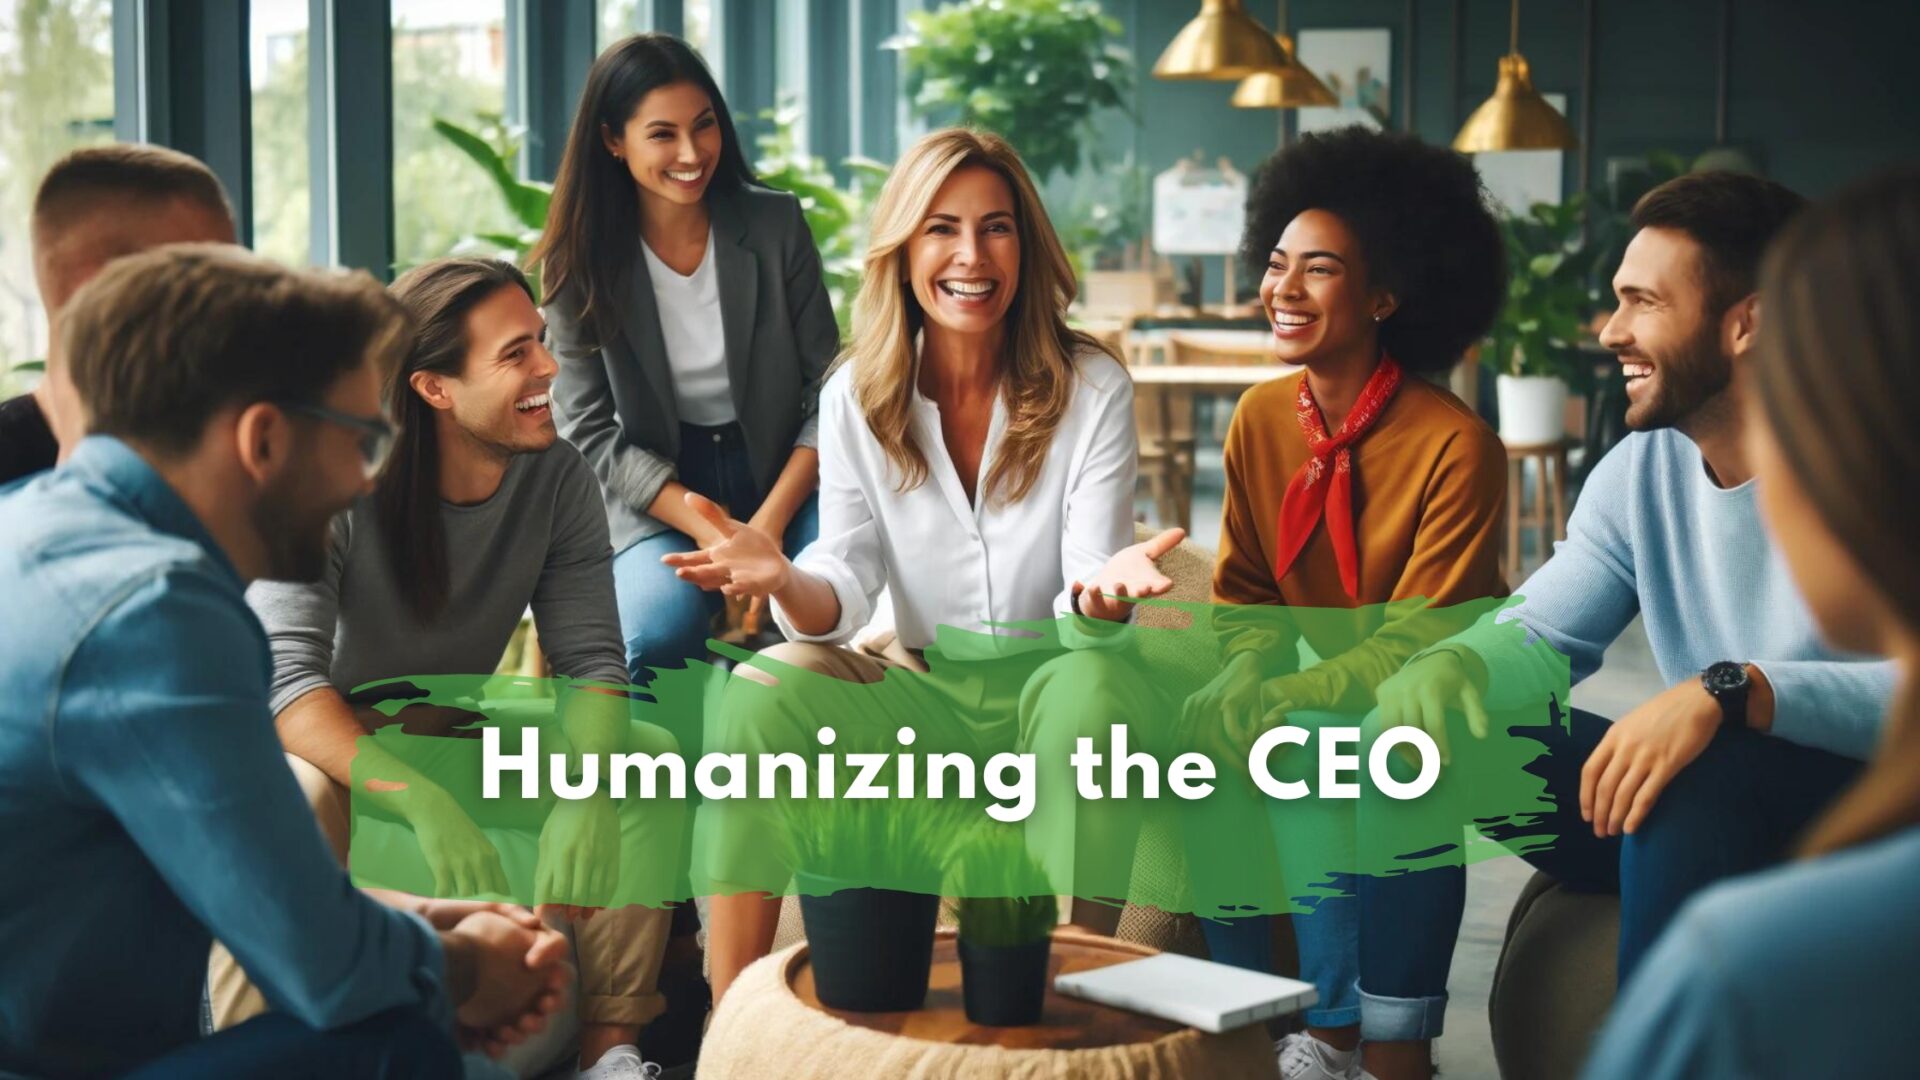 a female ceo interacts with her employee, humanizing the ceo concept